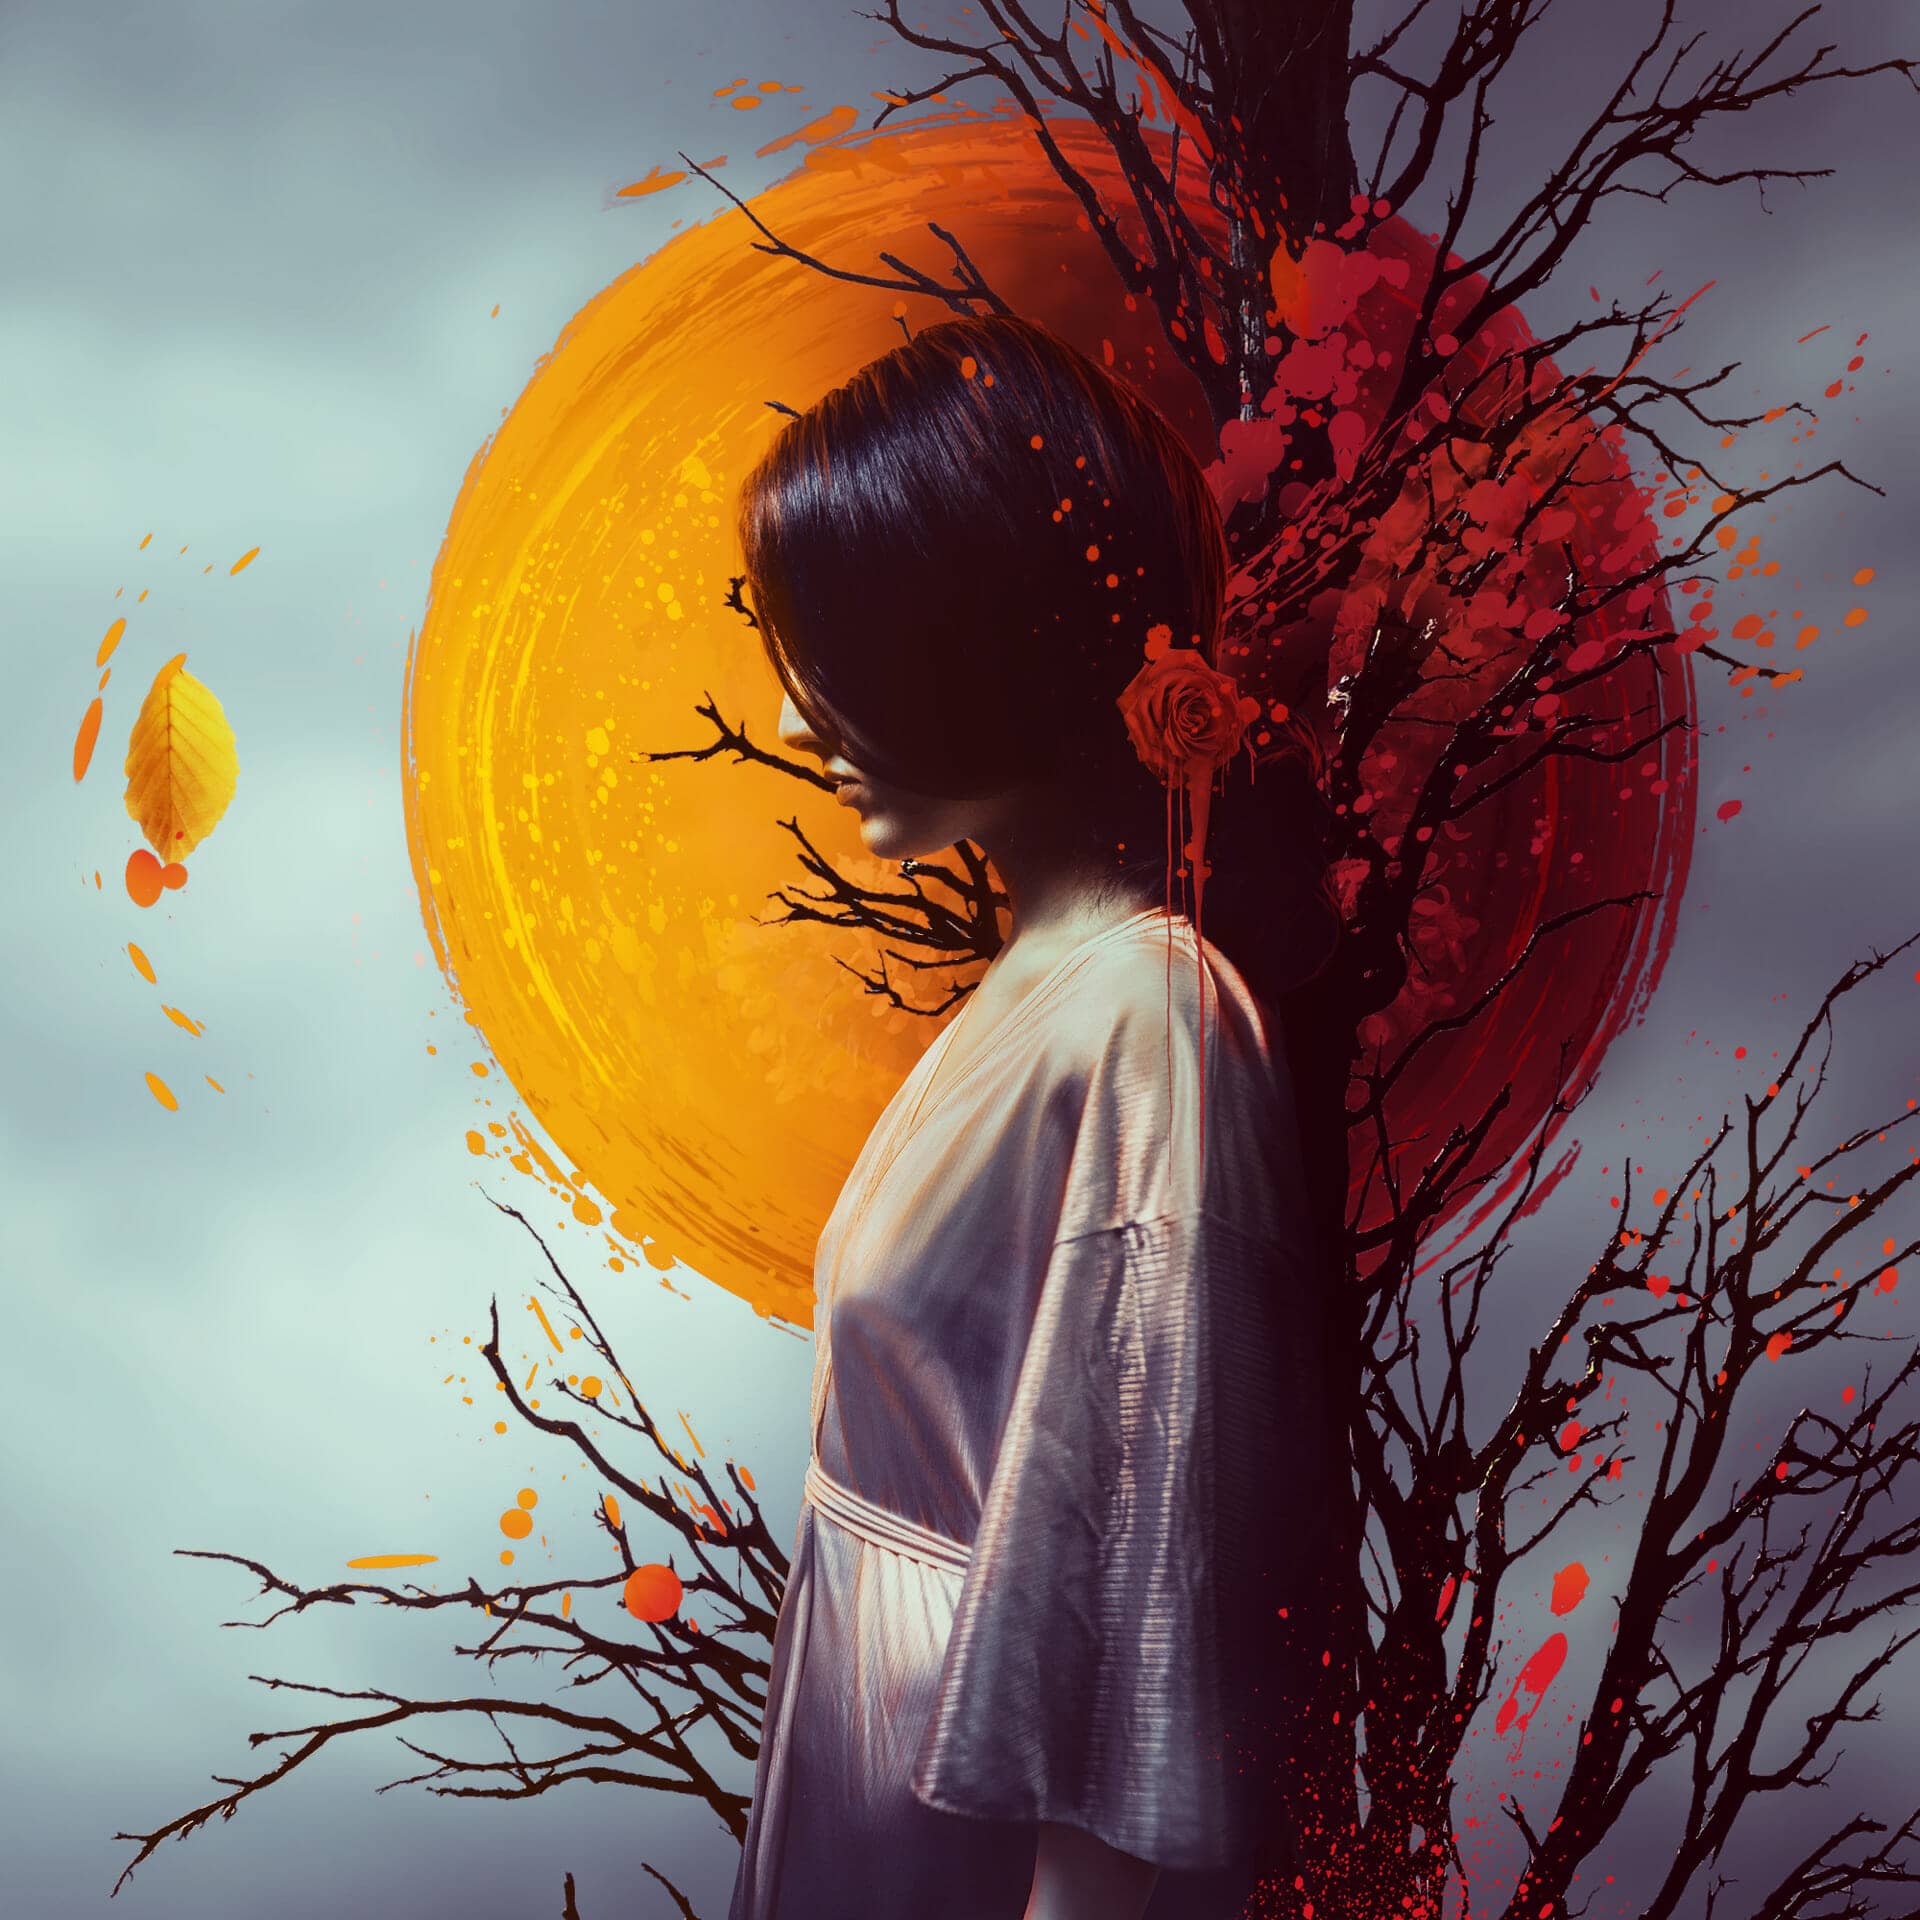 How to Create an Abstract,  Fantasy Autumn Artwork with Adobe Photoshop